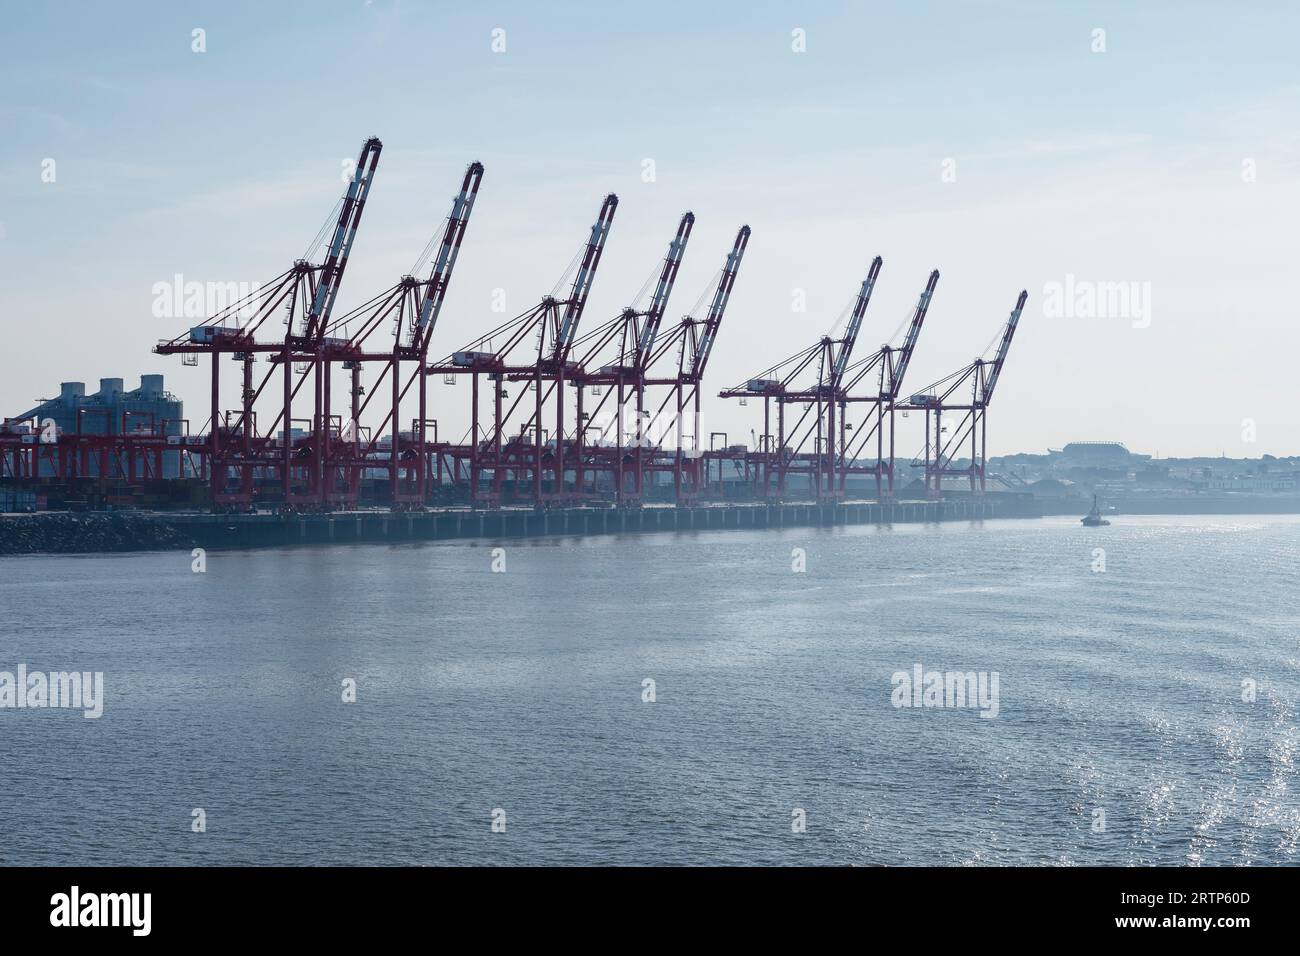 A line of ship to shore container cranes at Peel Ports dock in Liverpool UK Stock Photo